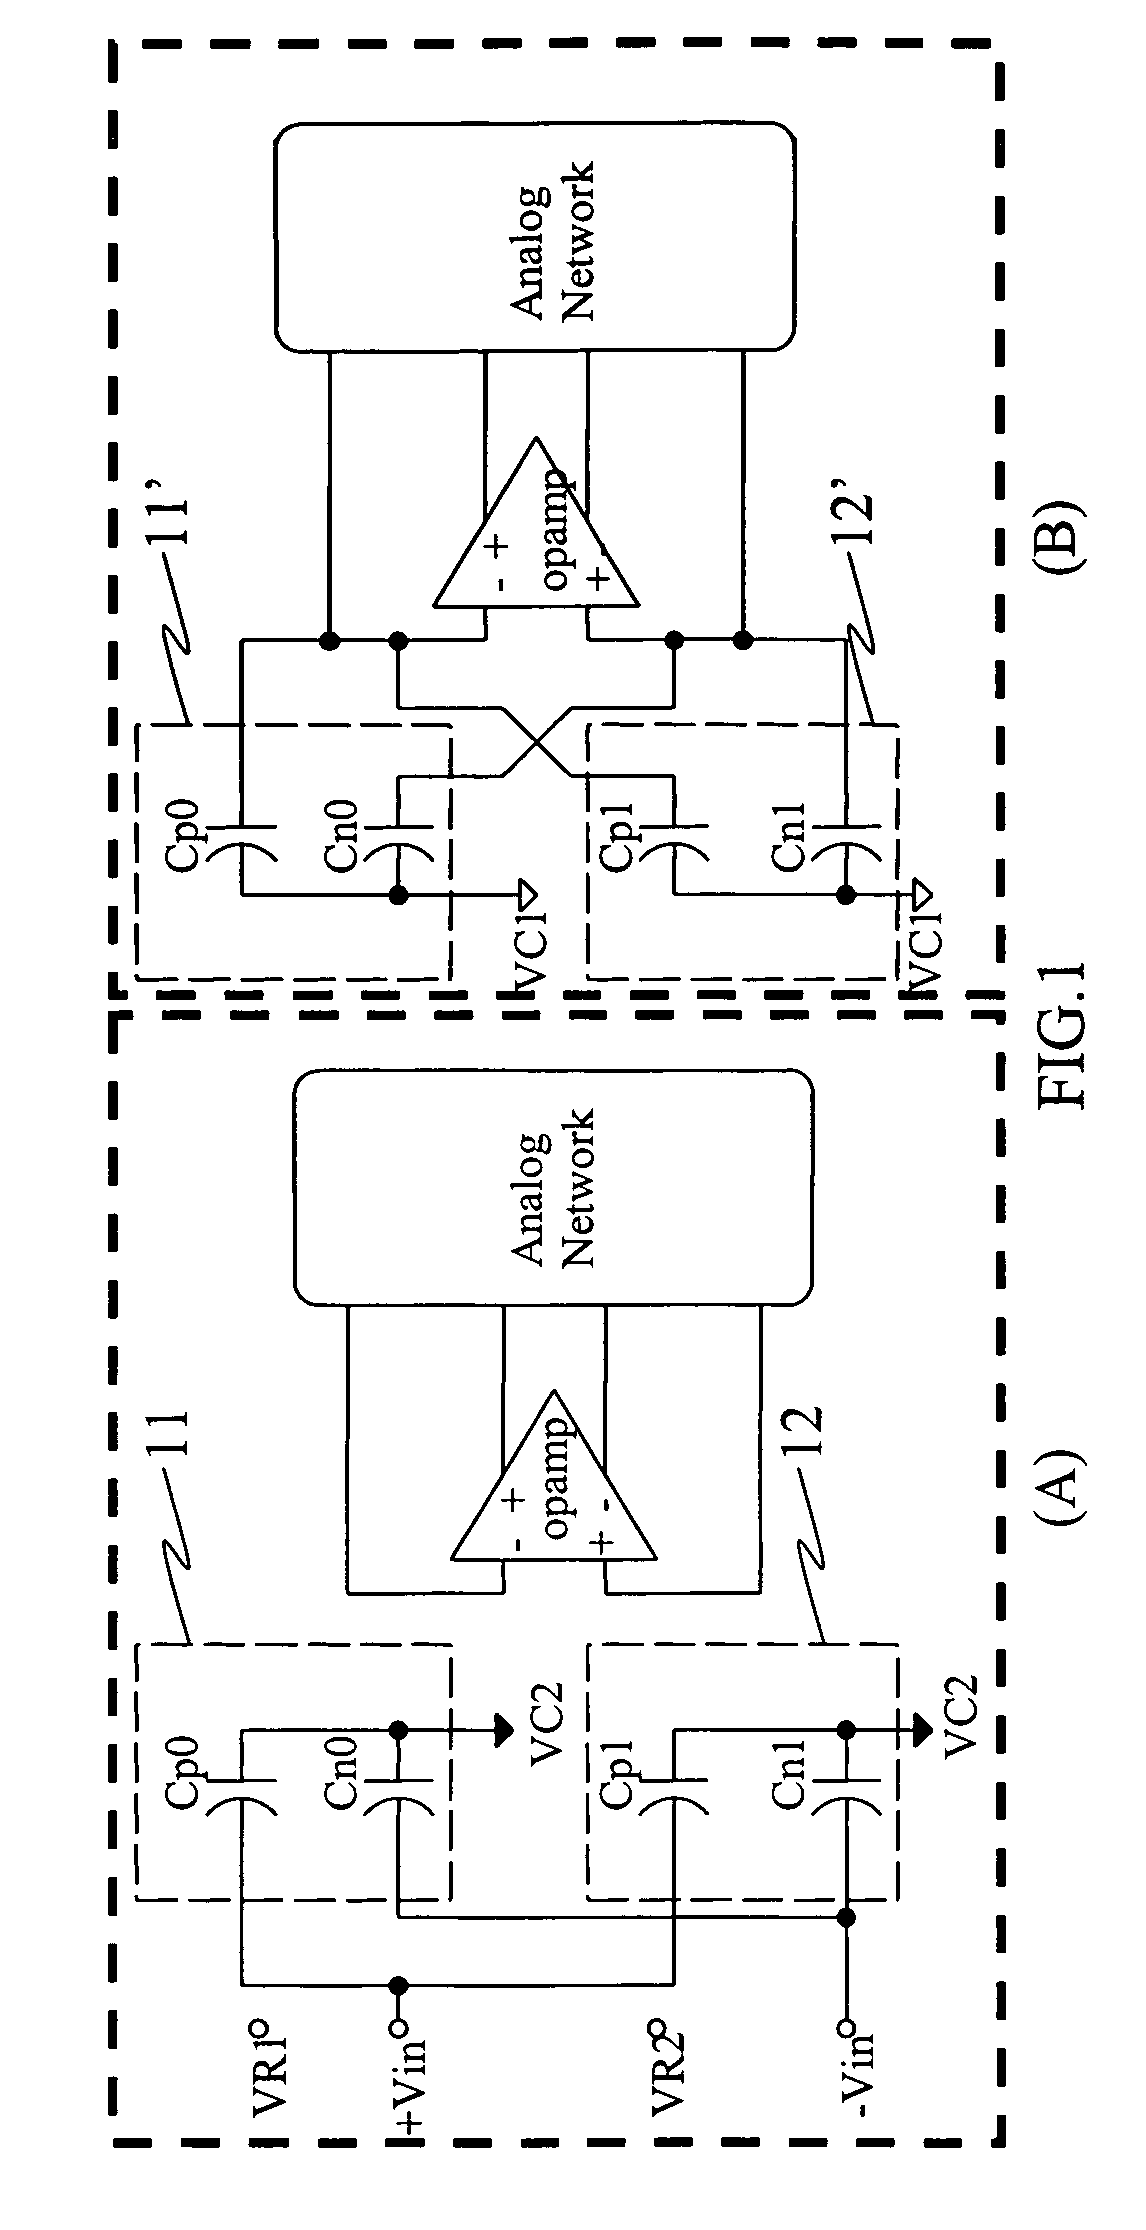 Reconfigurable switched-capacitor input circuit with digital-stimulus acceptability for analog tests